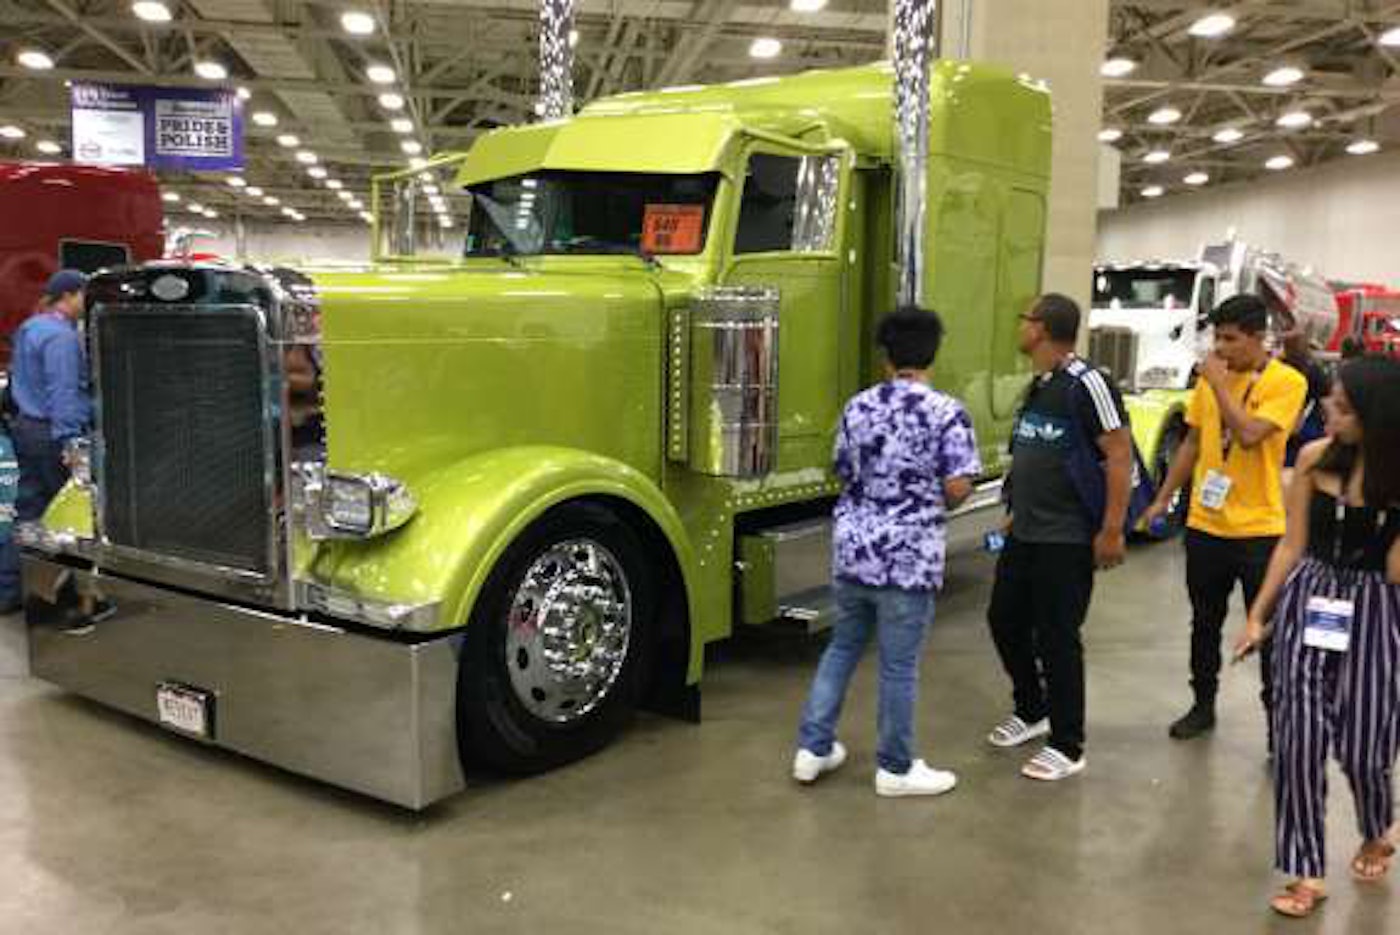 Here is a recap of the Great American Trucking Show Truckers News